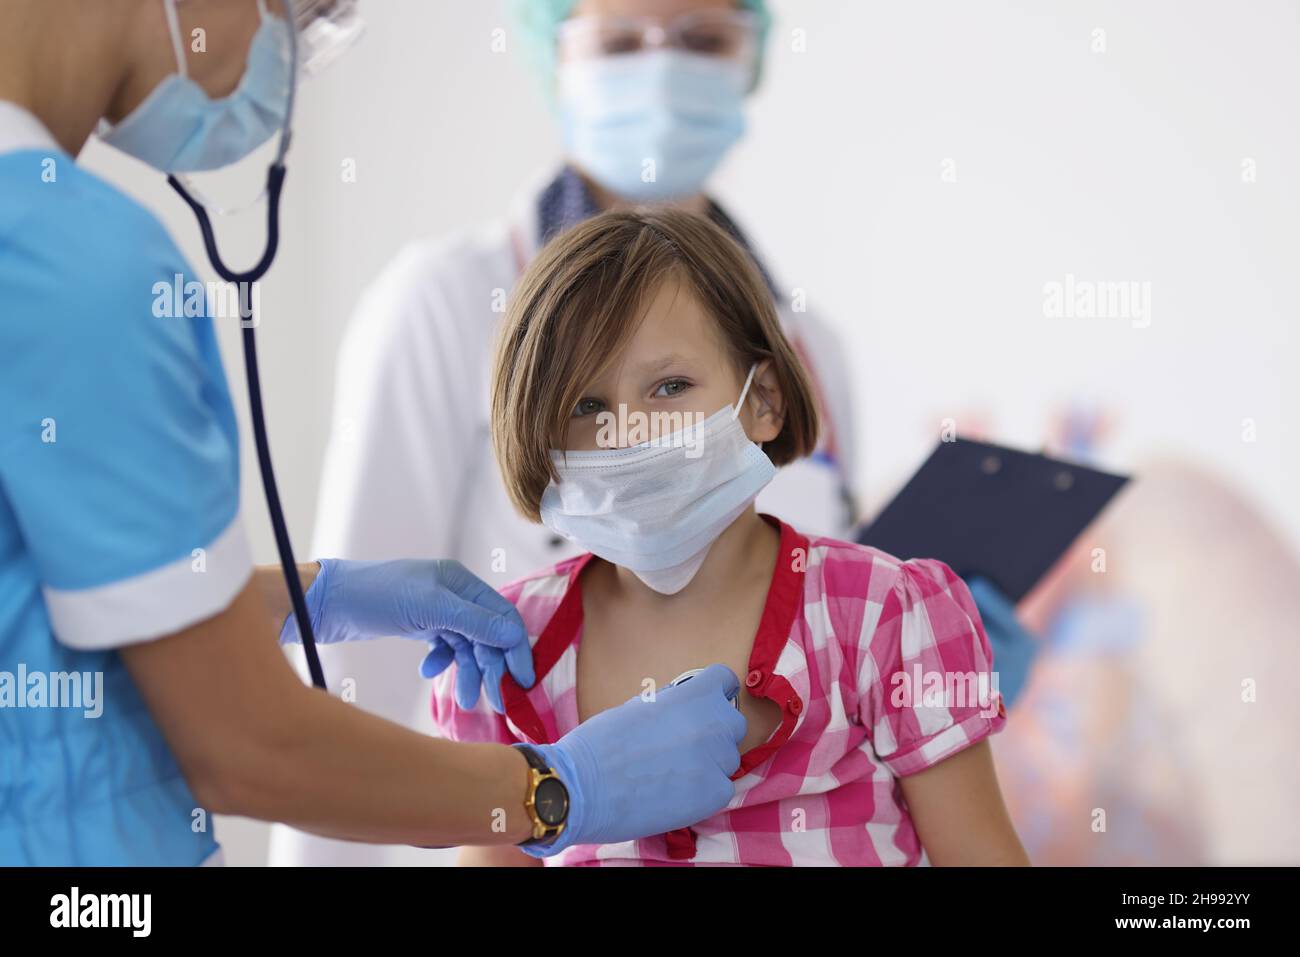 Girl being examined by pediatrician doctor with stethoscope tool Stock Photo